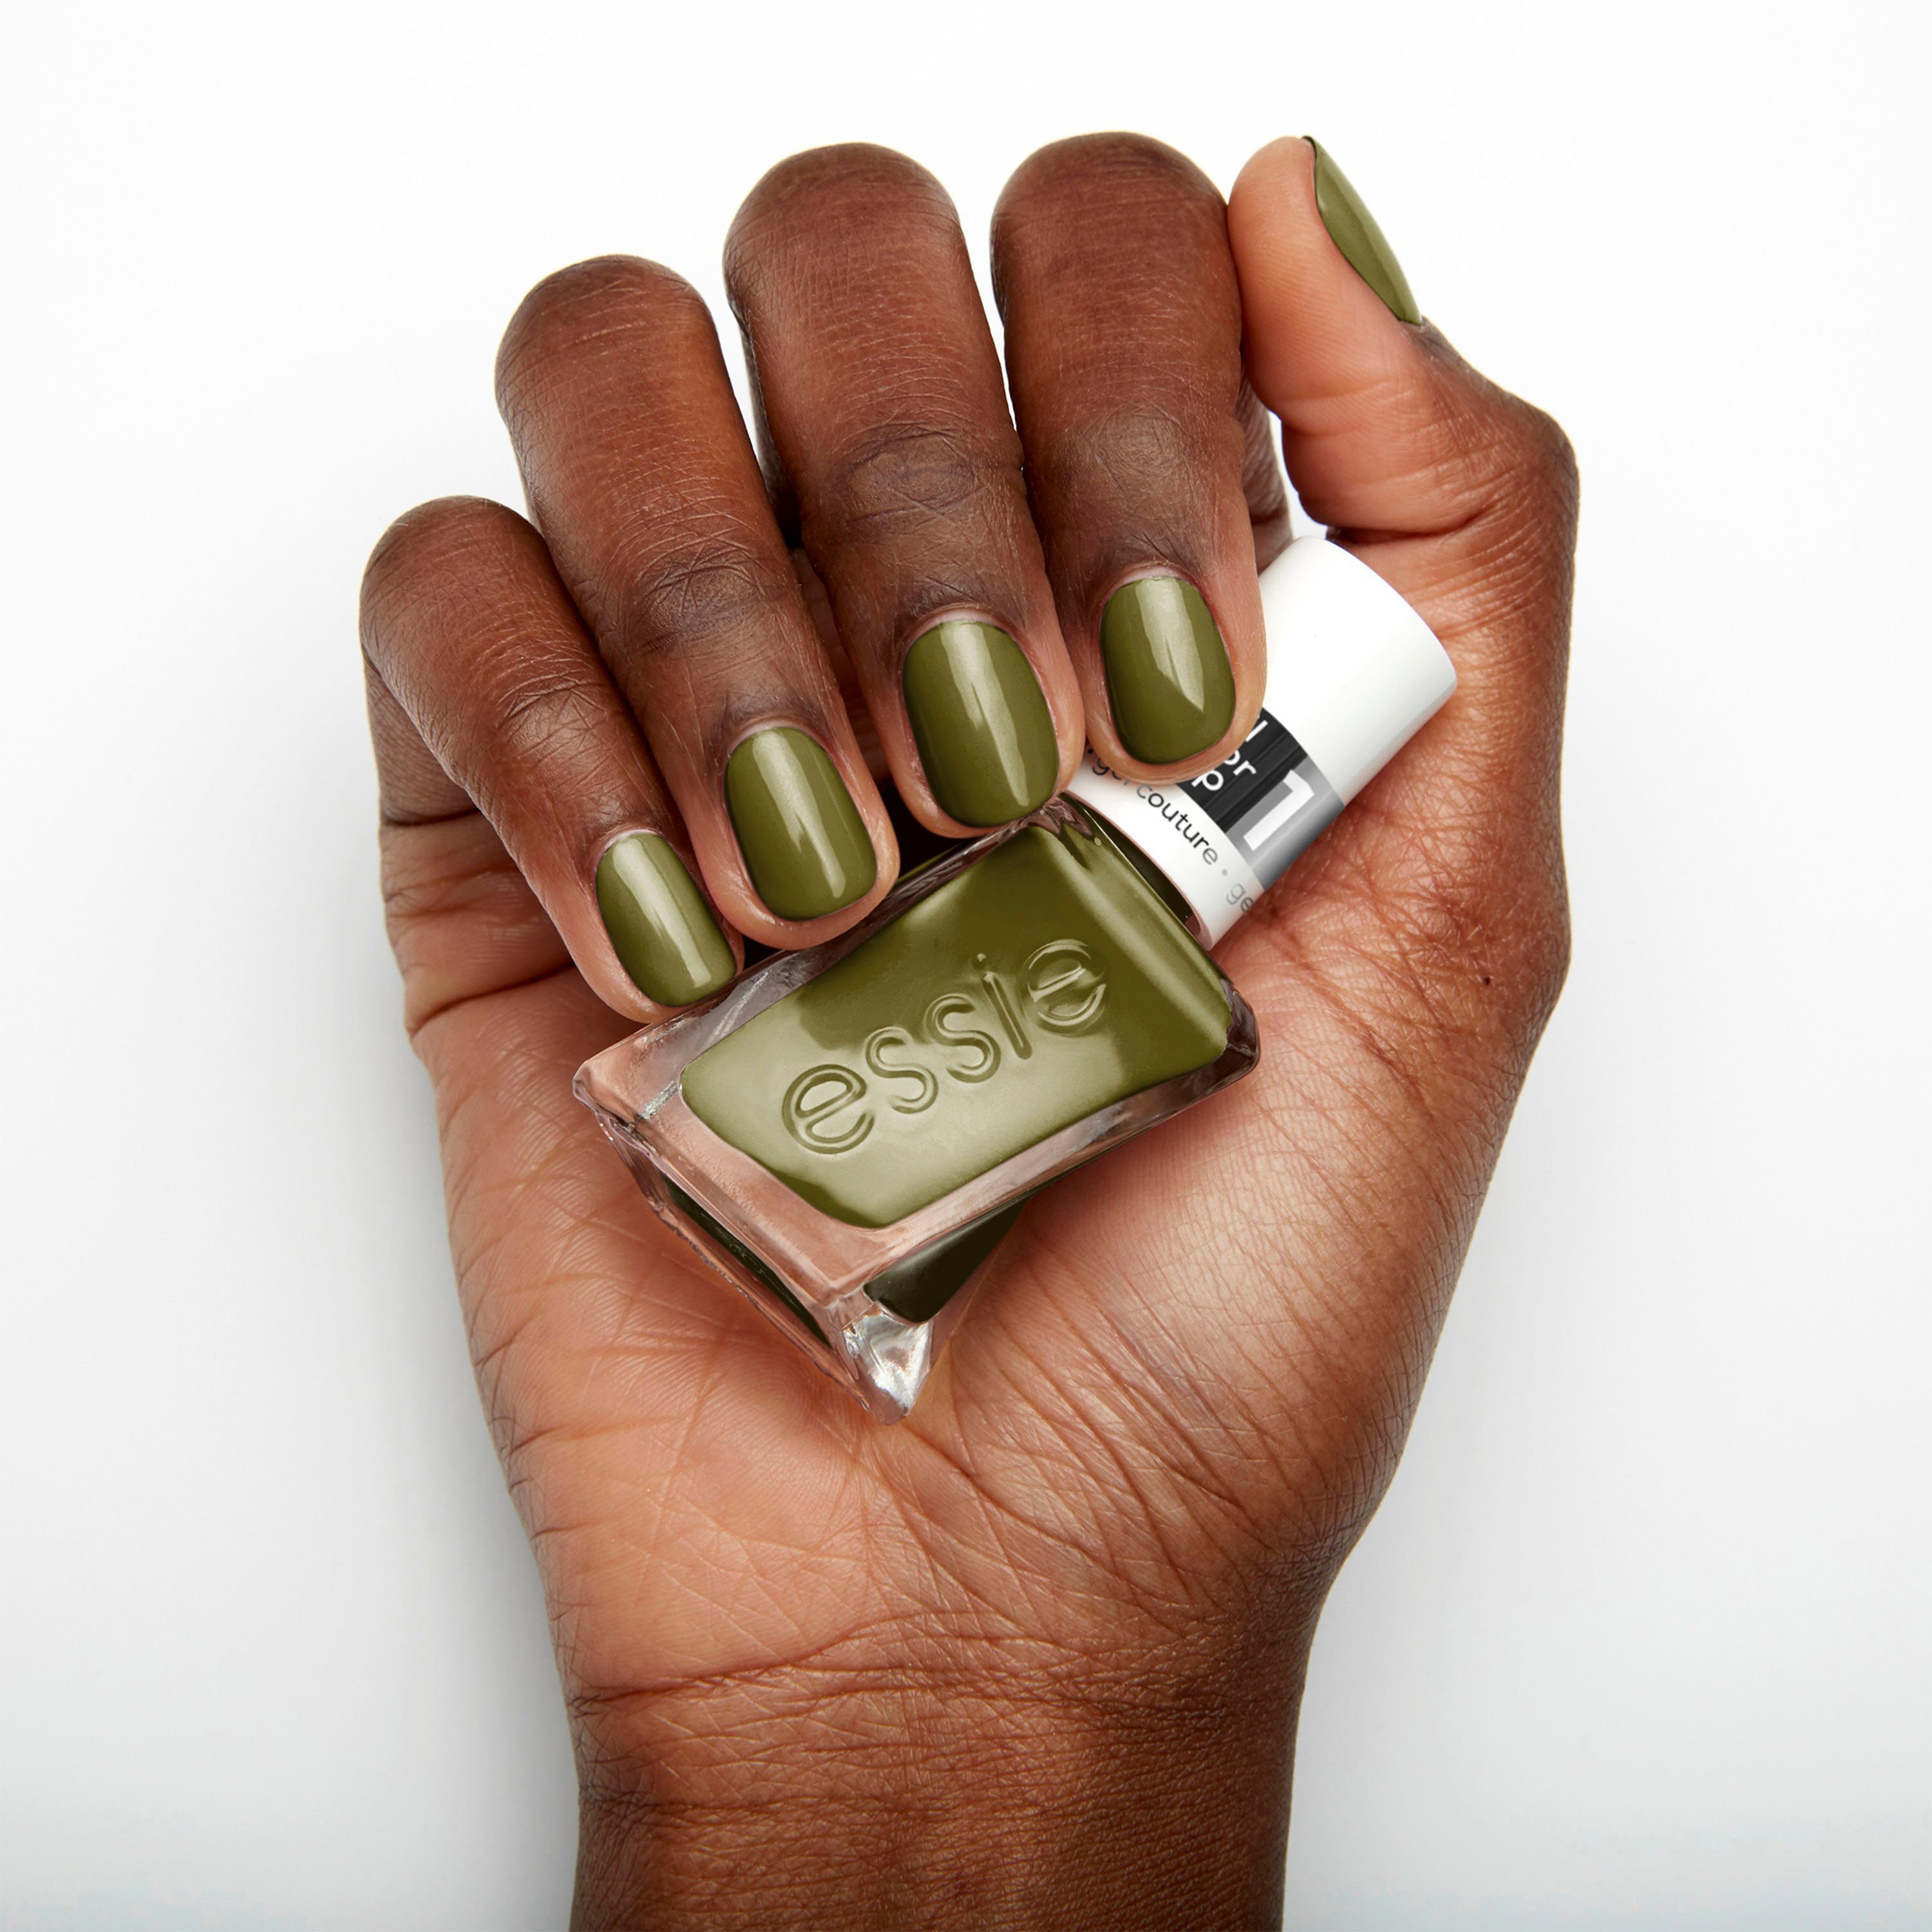 essie Nagellack, gel couture 540 gel plaid, couture - totally